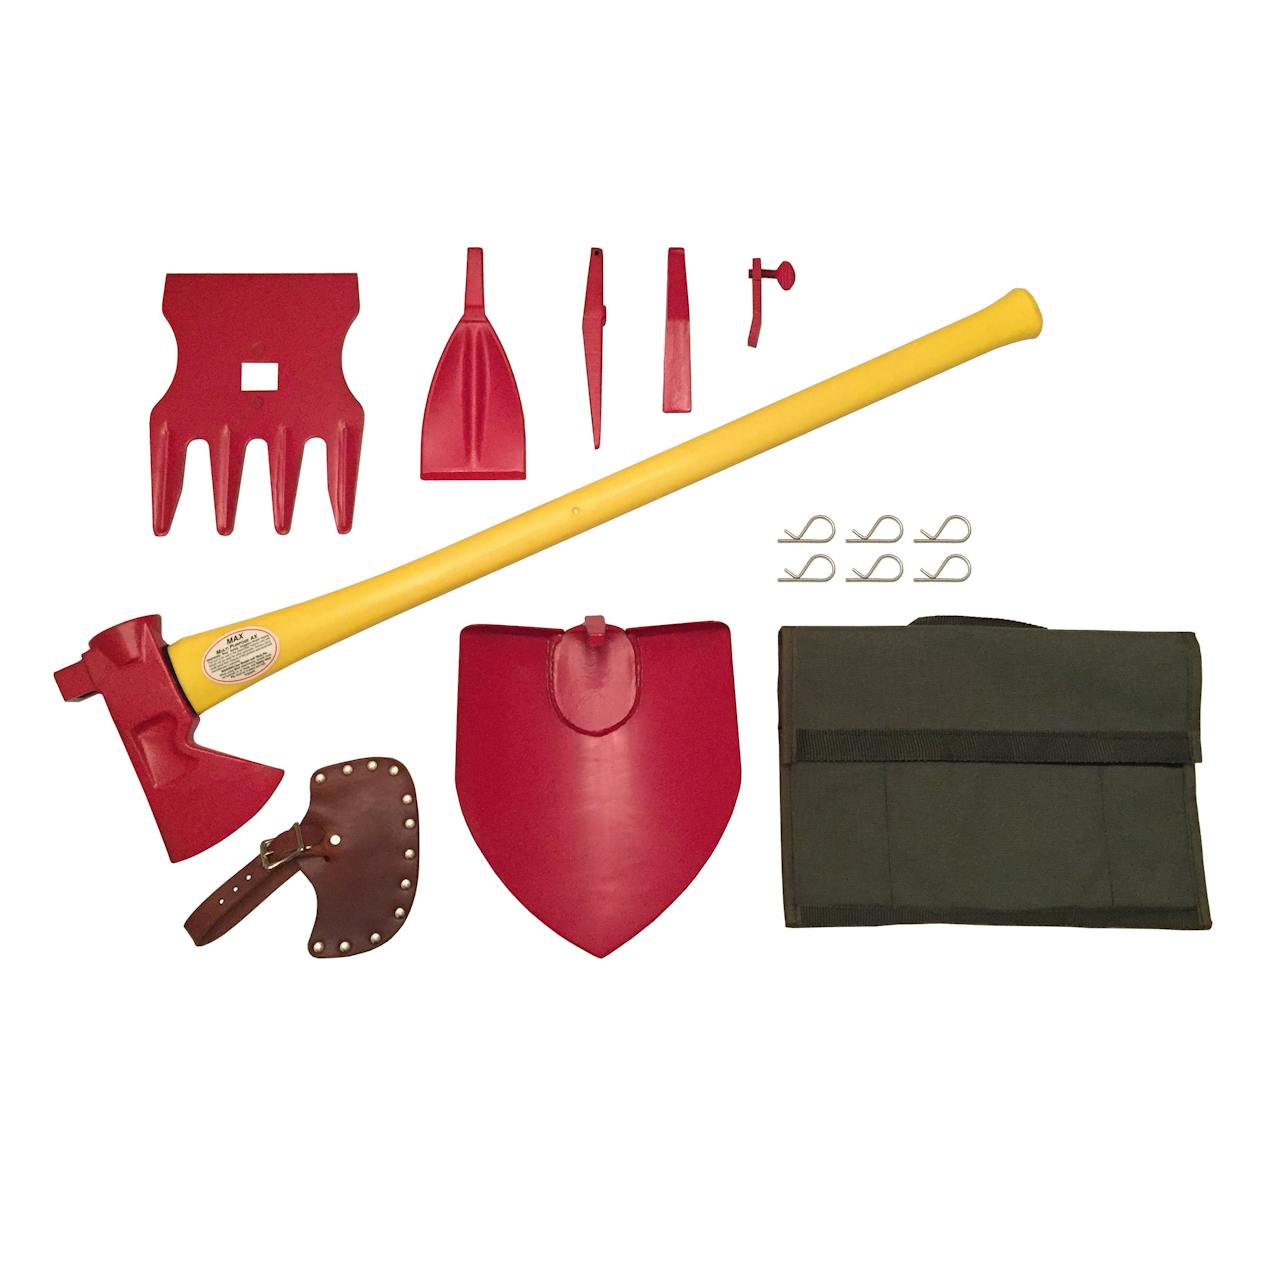 Forrest Tool Co. The MAX Multipurpose Axe Kit